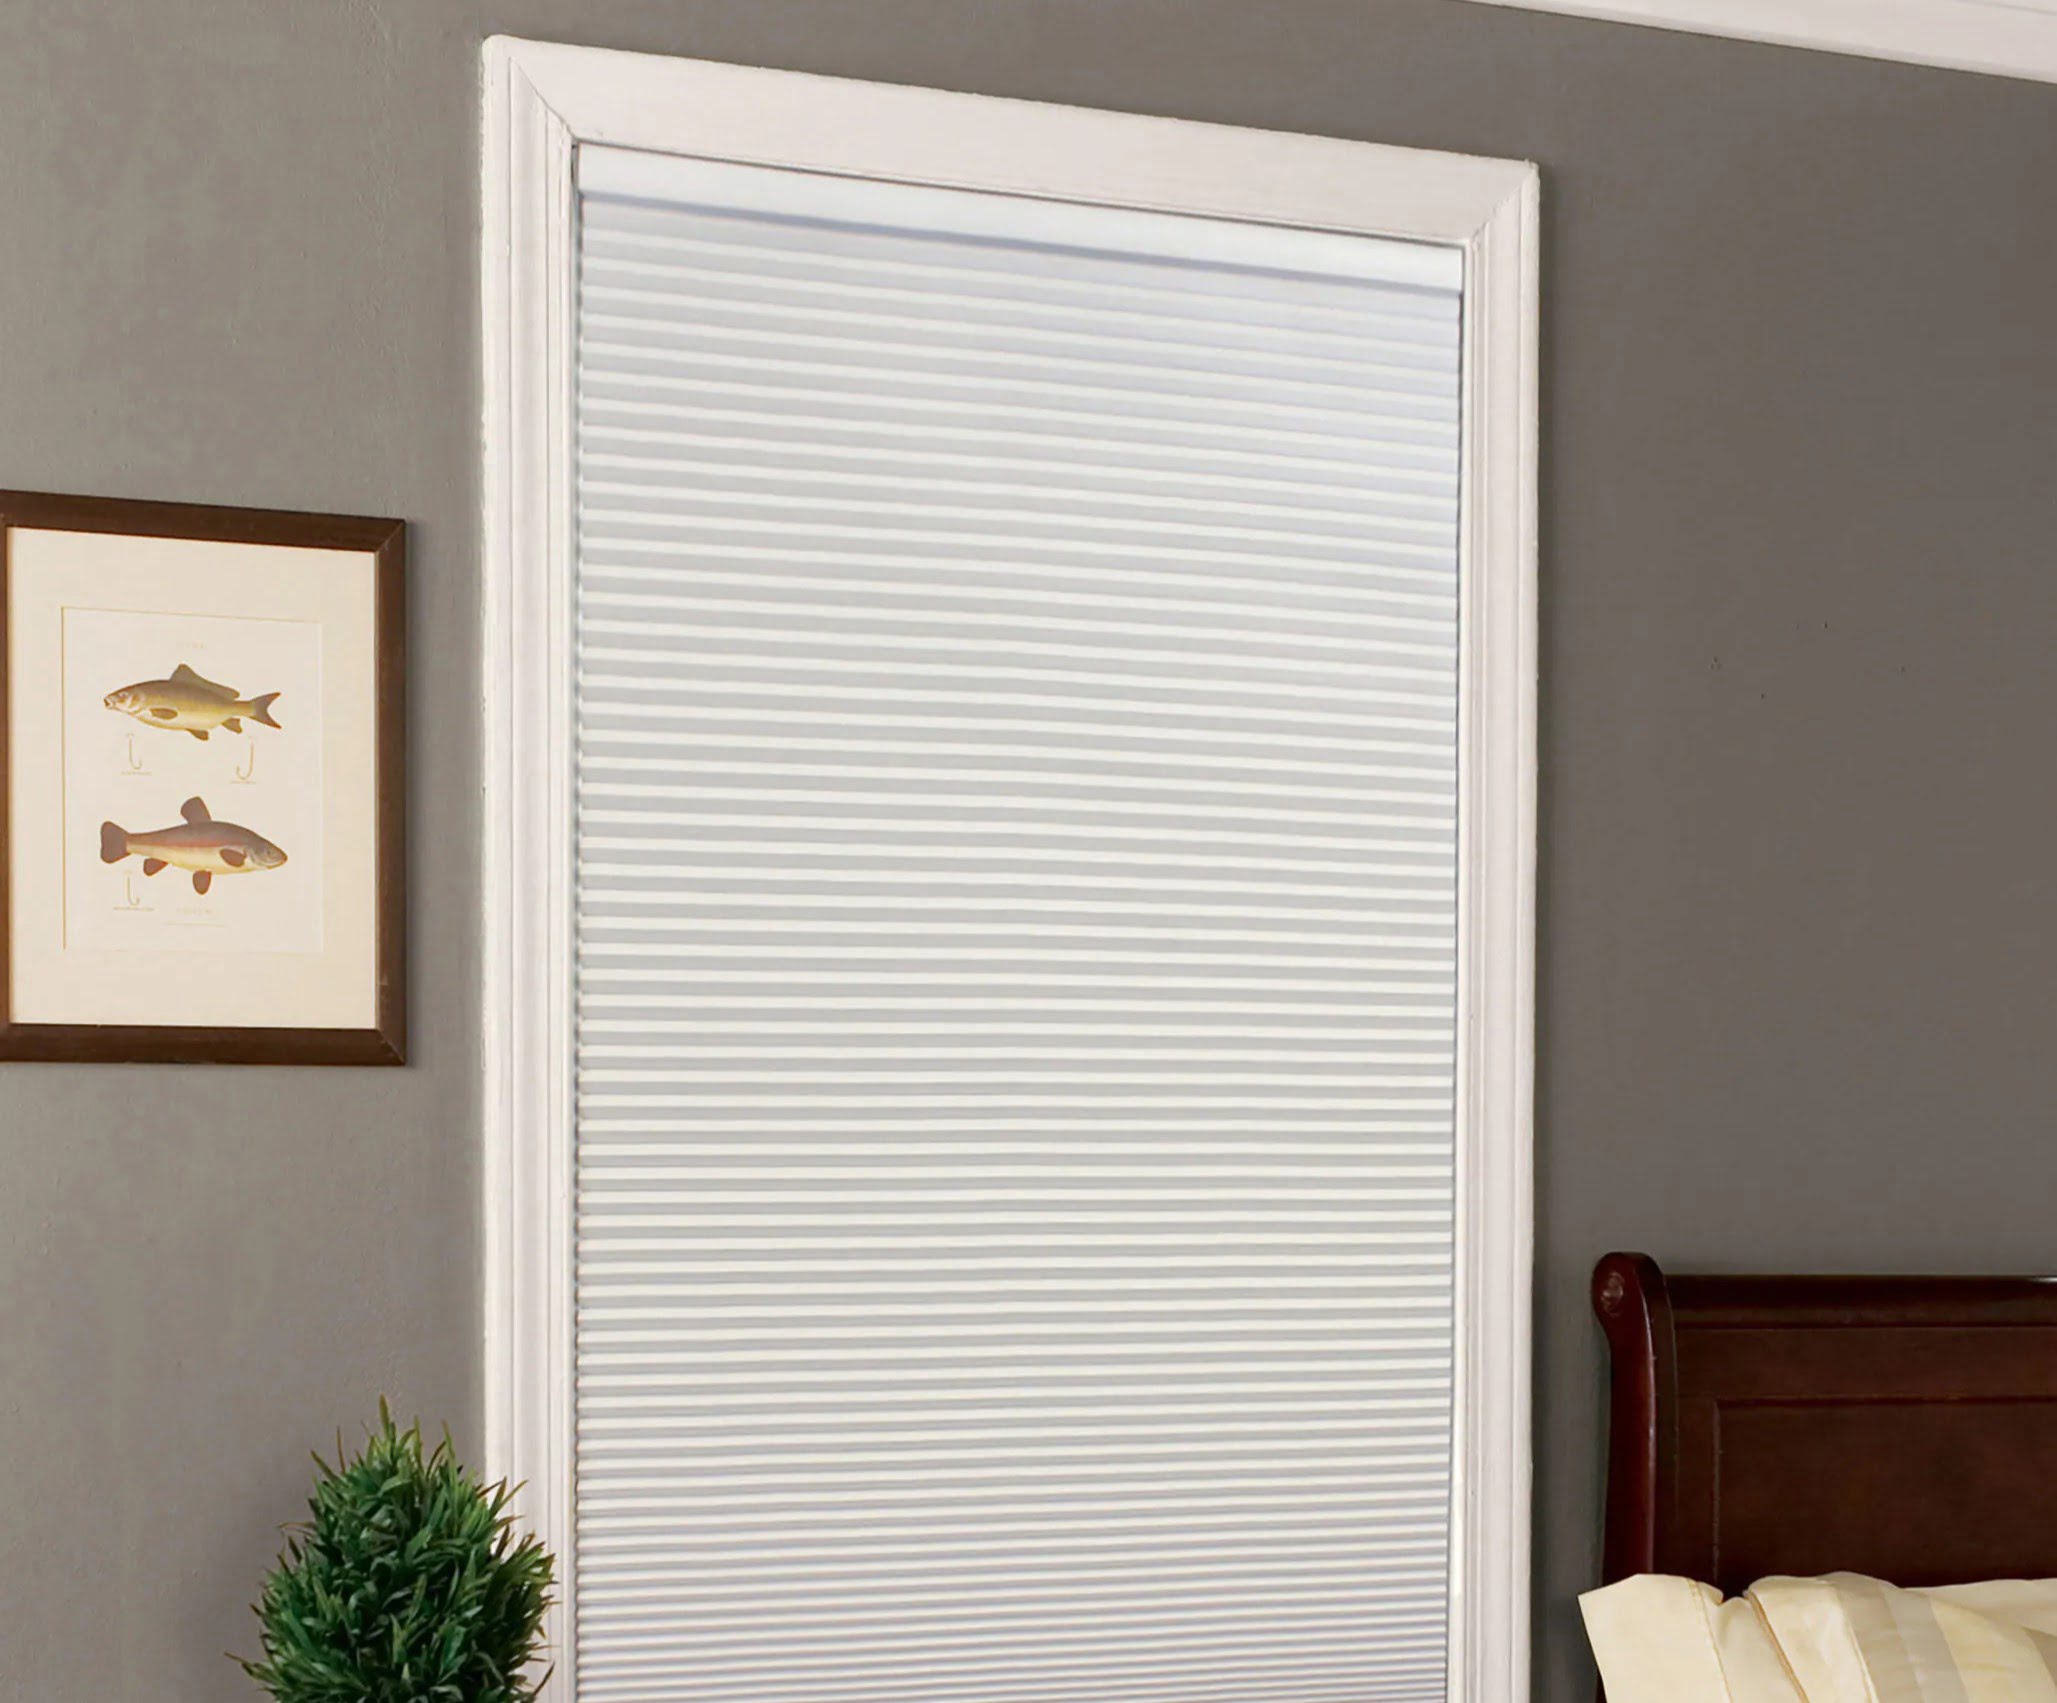 How To Install Allen + Roth Blinds